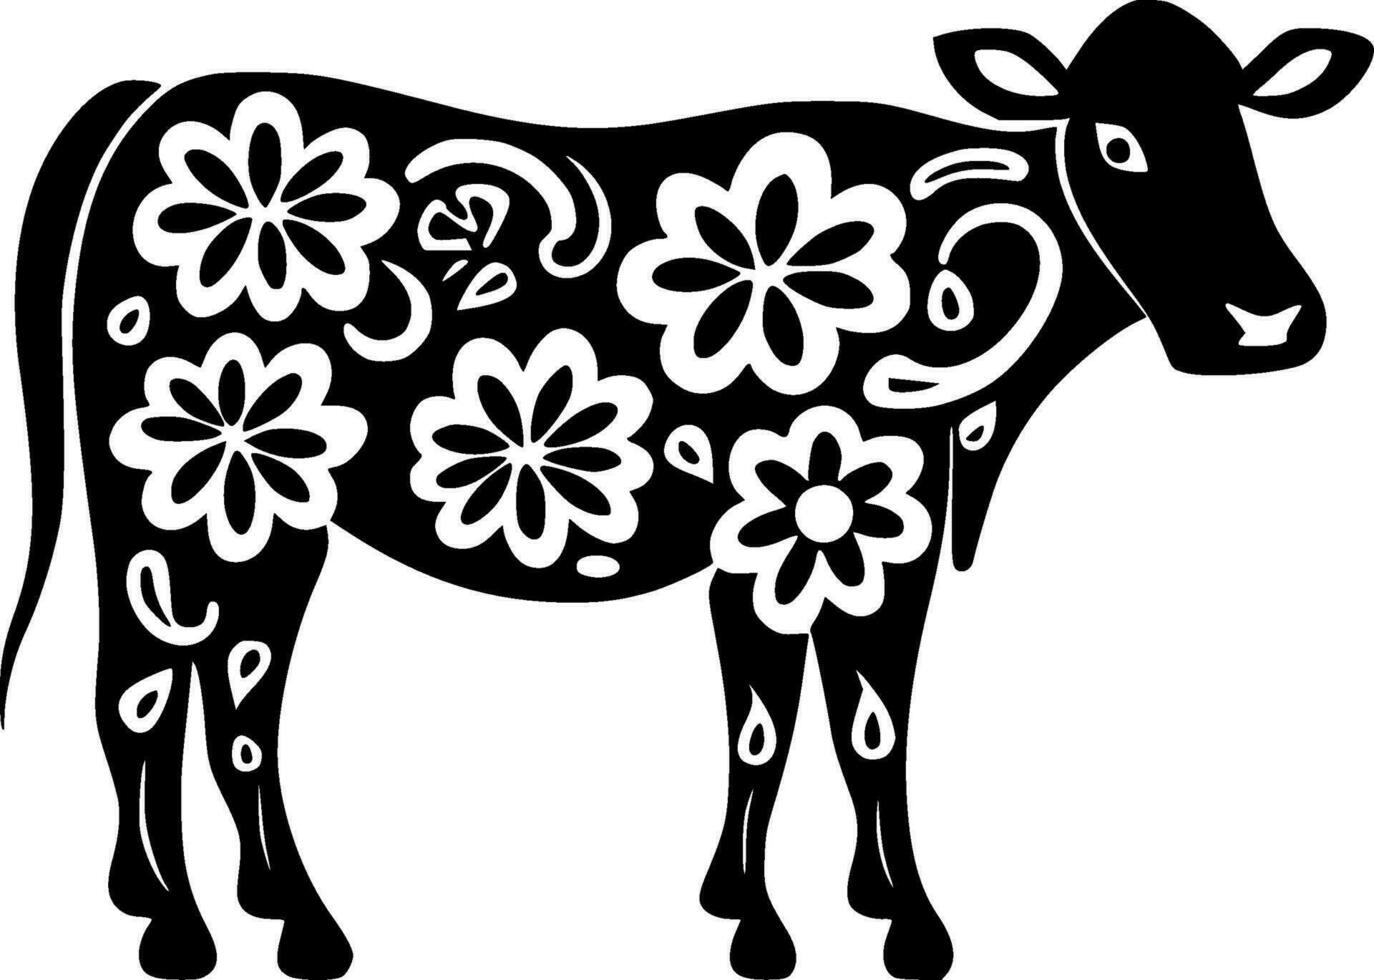 Cow, Black and White Vector illustration